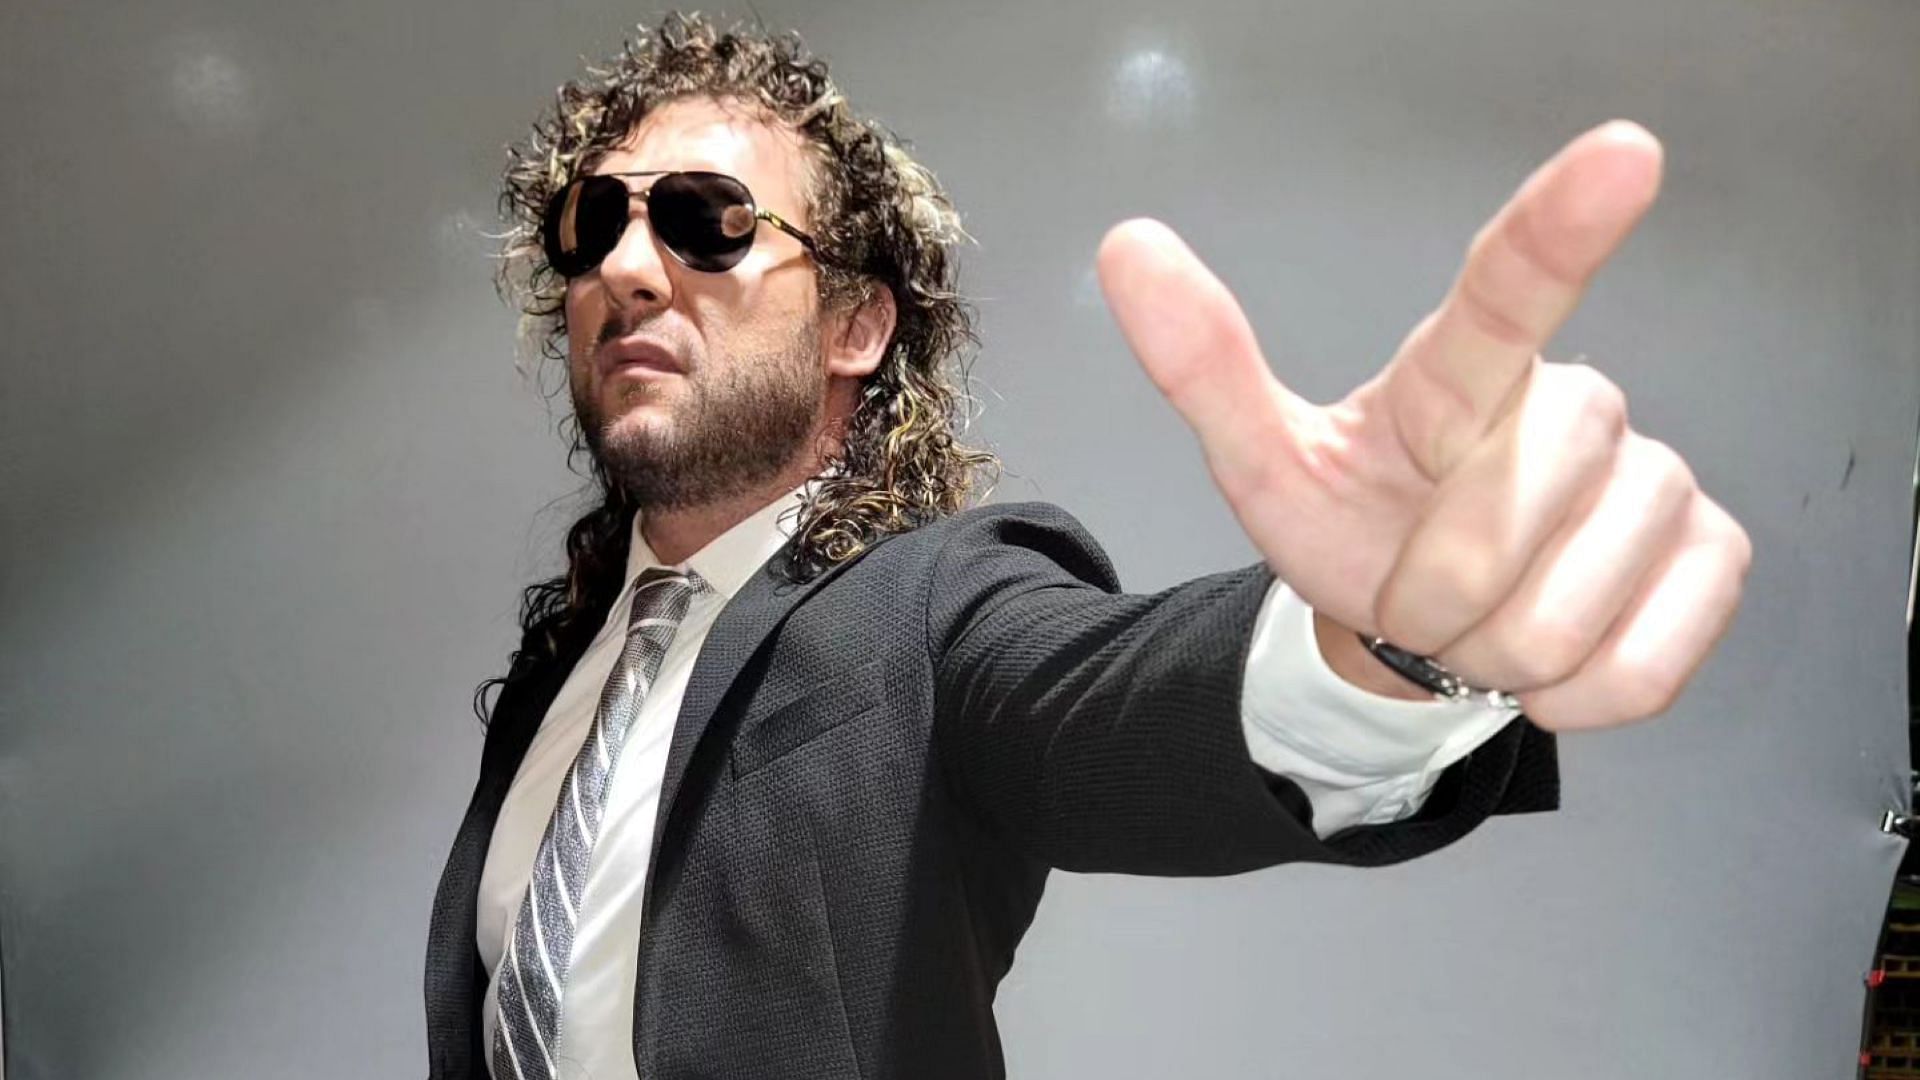 Kenny Omega poses backstage for AEW photo shoot